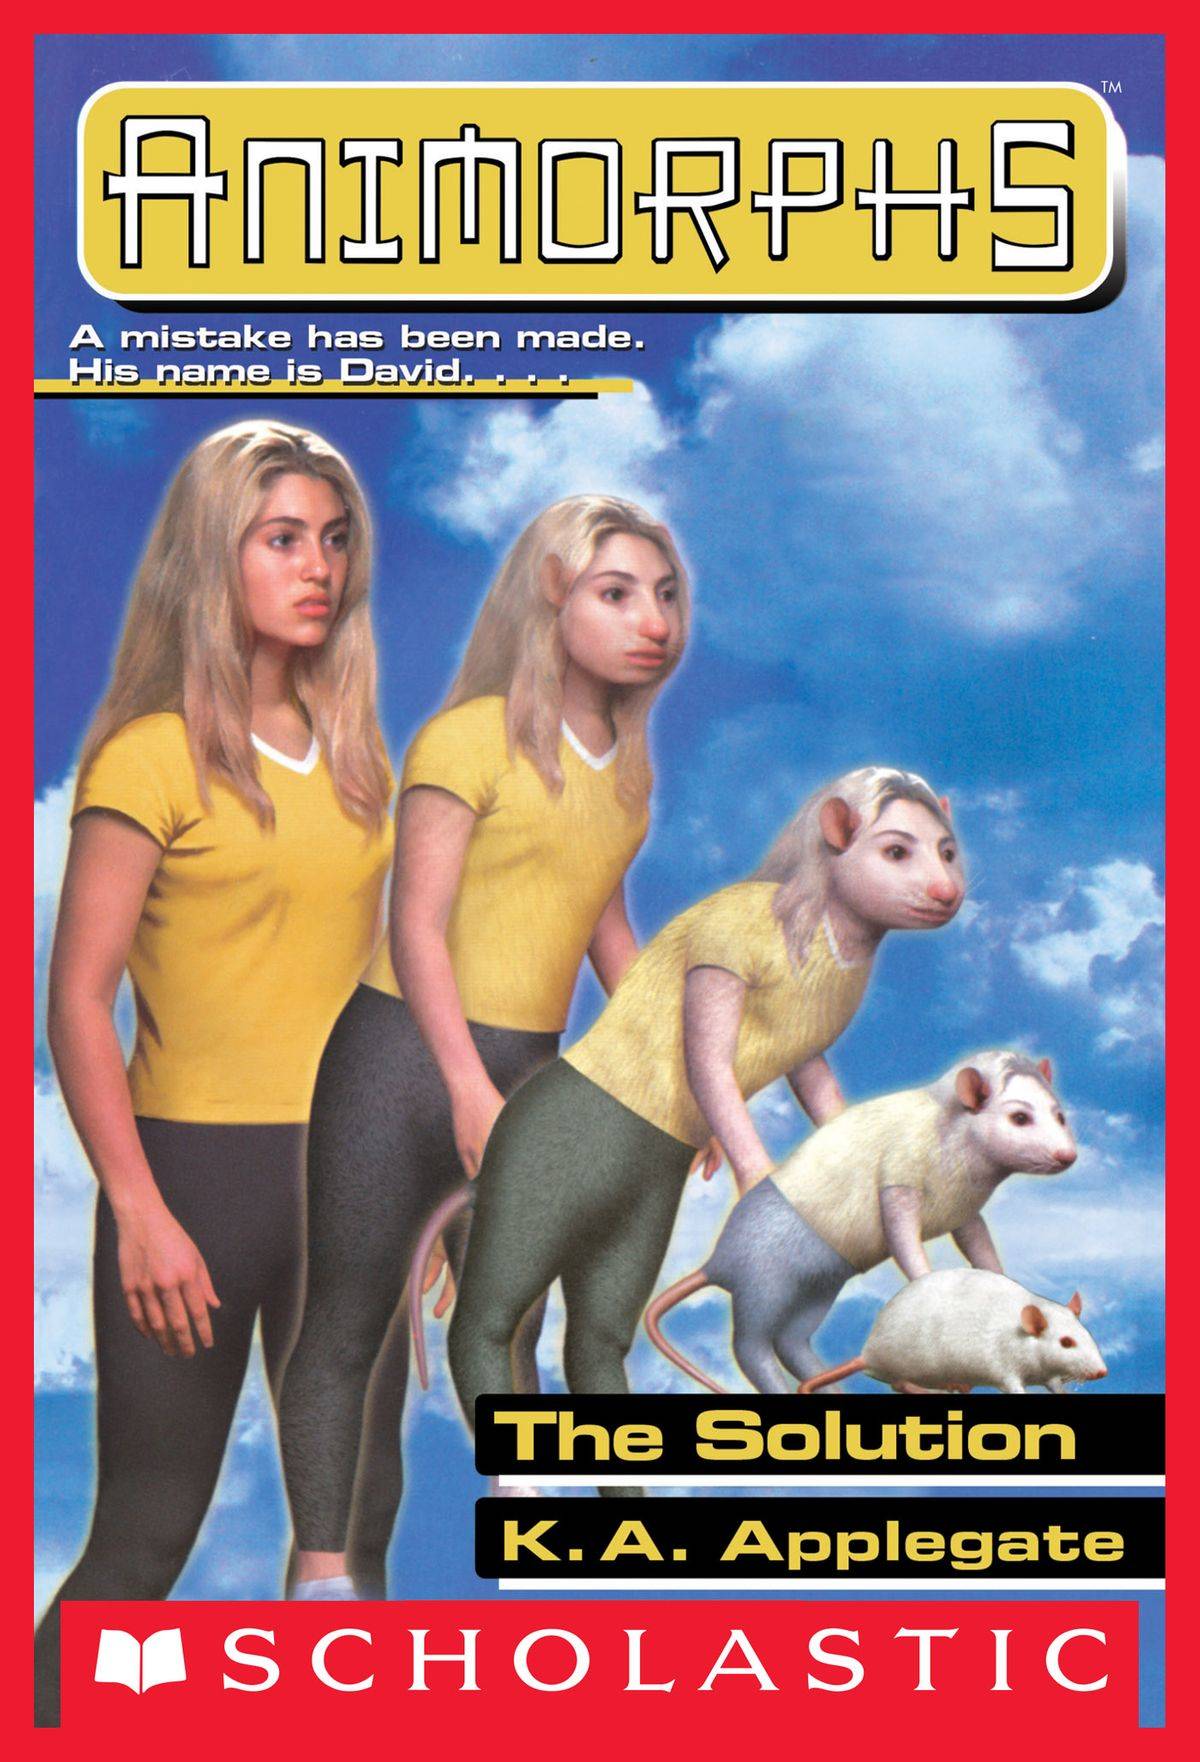 <p>The <i>Animorphs</i> series was a staple in most school libraries which made it many kids' earliest introduction to the idea of science fiction.</p> <p>The various shapeshifter stories hit on mature themes for preteens including war, dehumanization, morality, leadership, innocence, family, and growing up.</p>